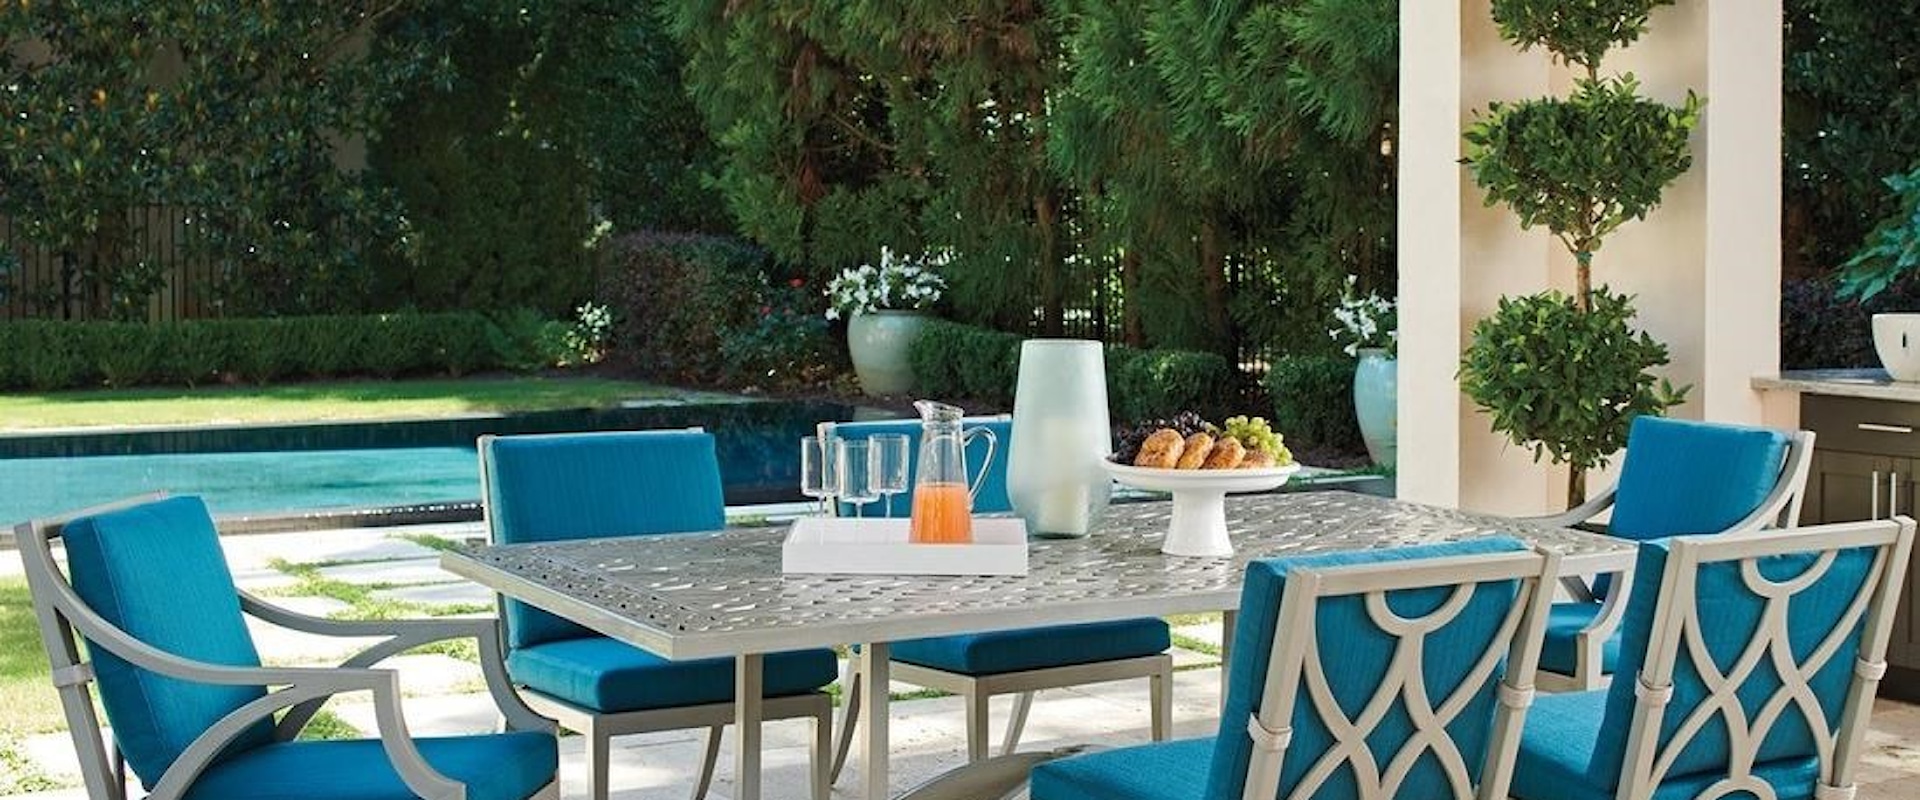 Transitional 7-Piece Outdoor Dining Set with Rectangular Table